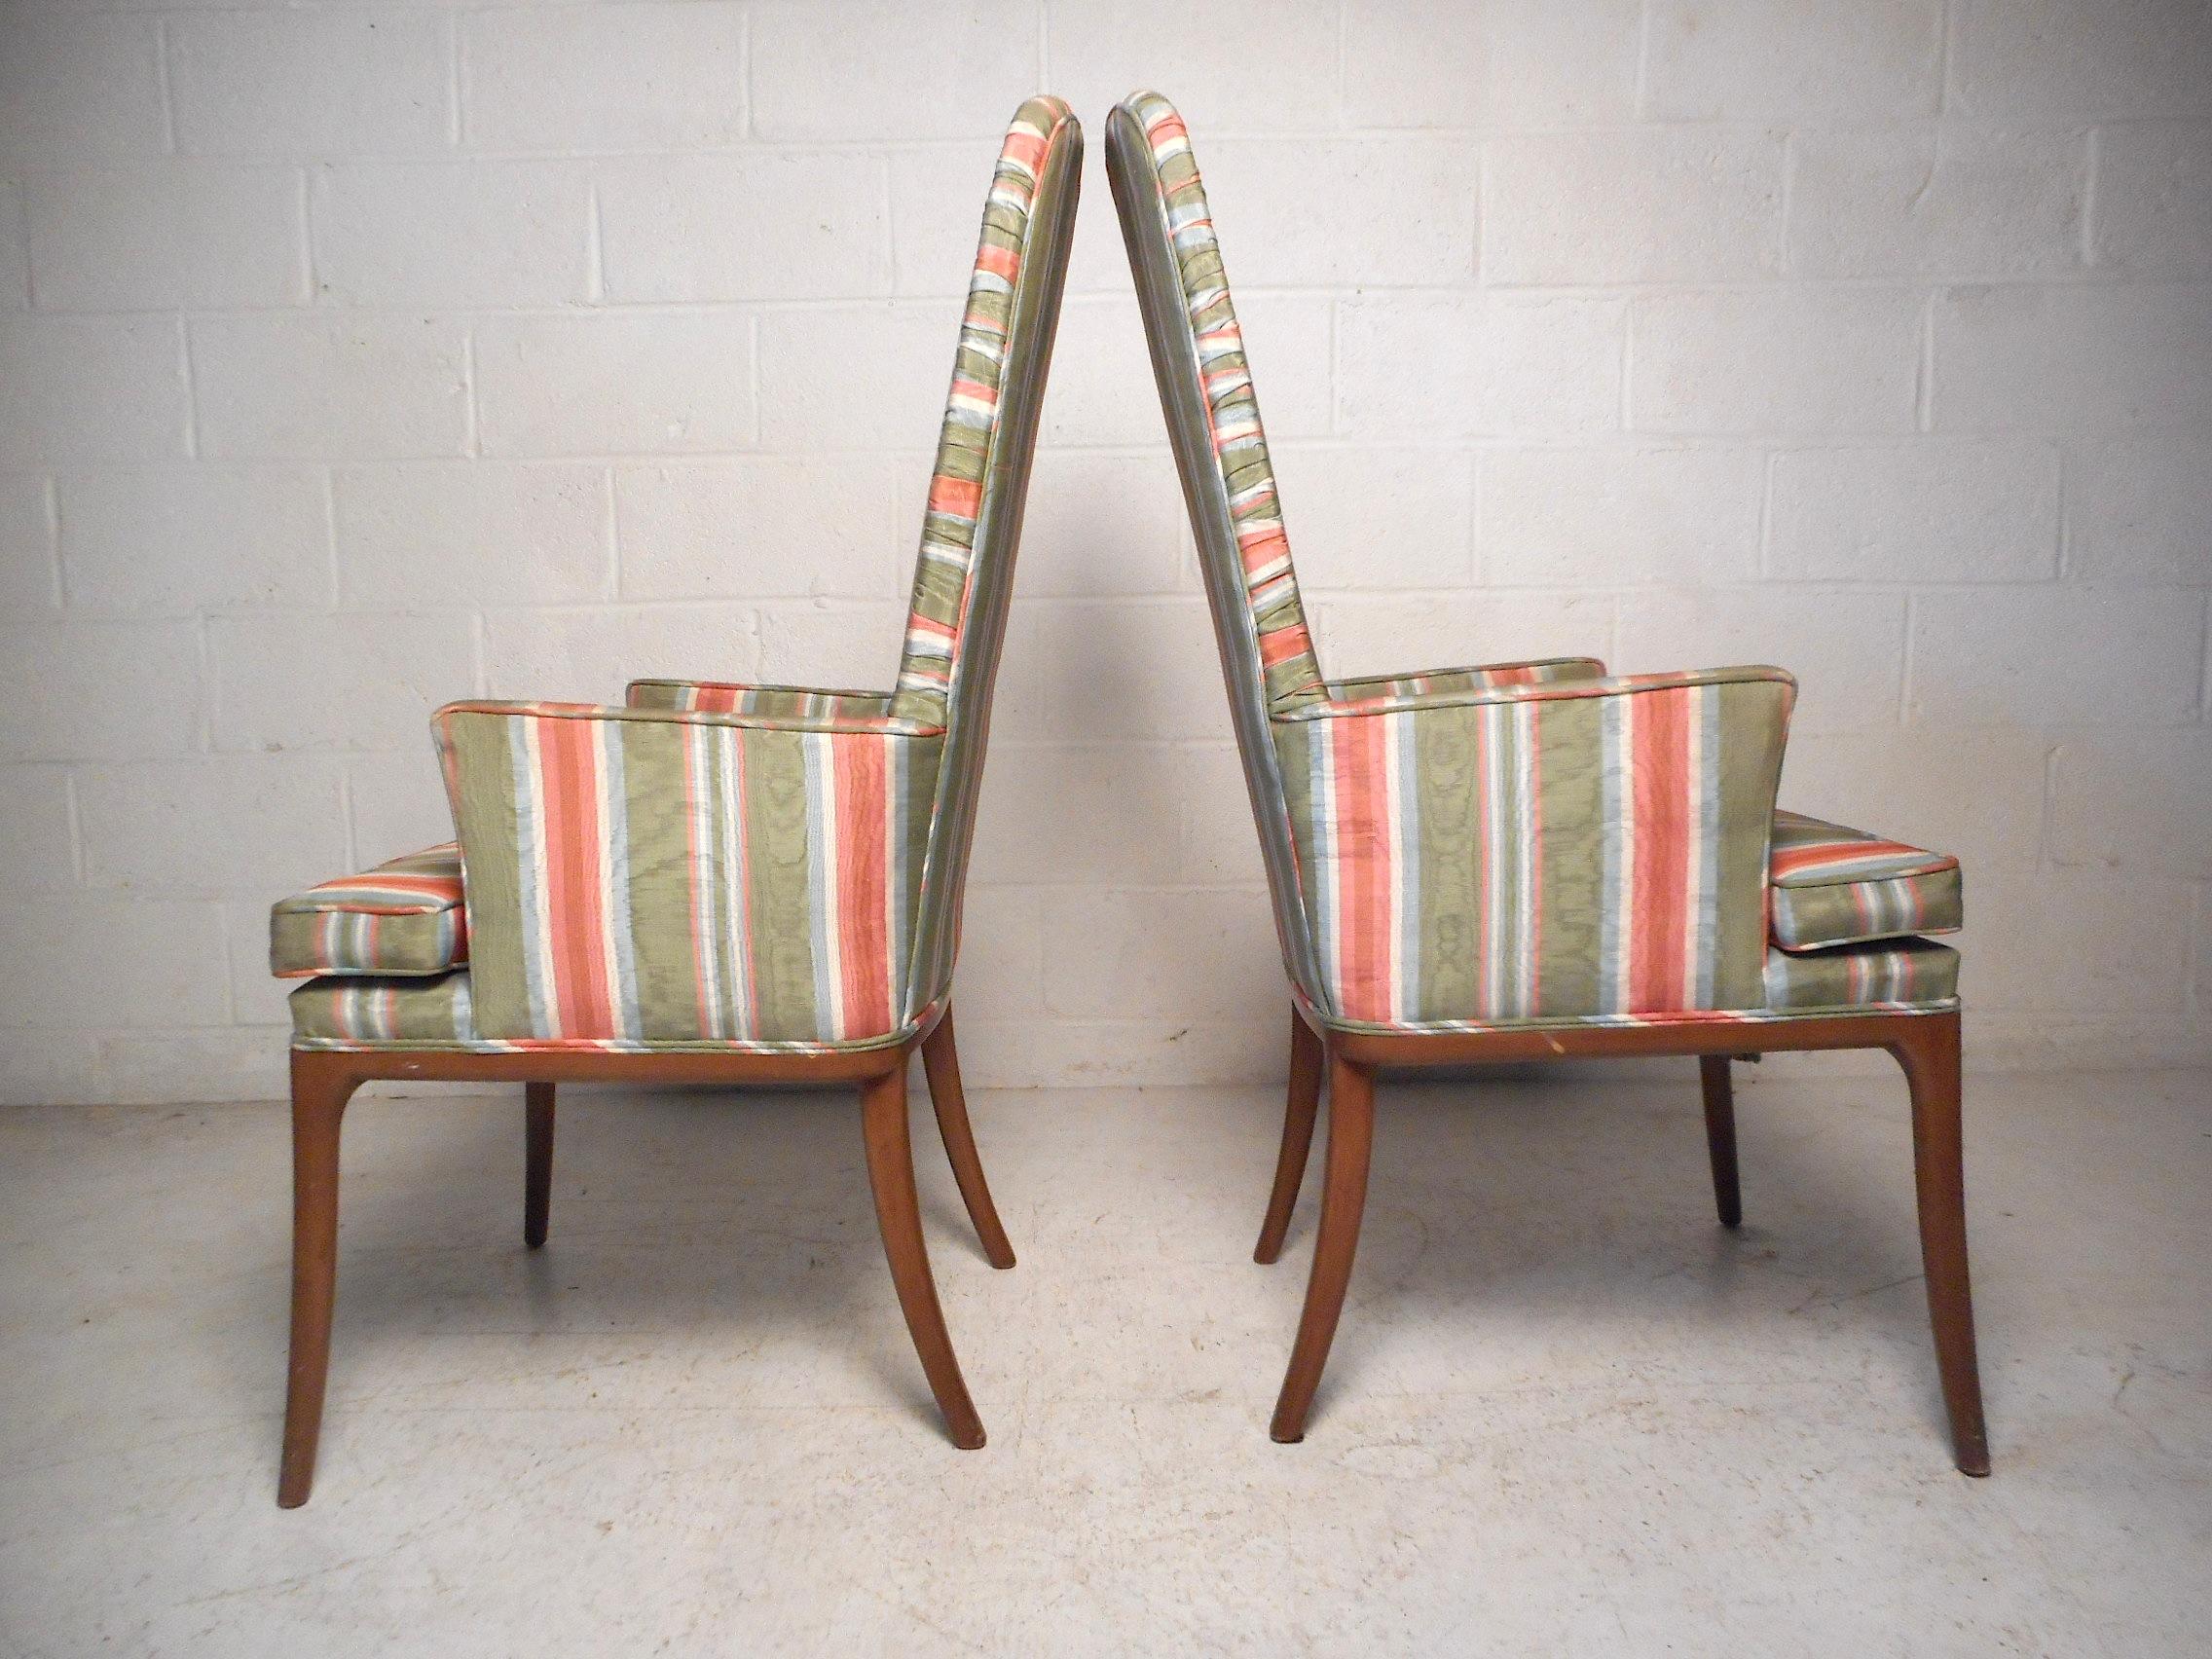 Pair of Midcentury High-Back Upholstered Chairs In Good Condition For Sale In Brooklyn, NY